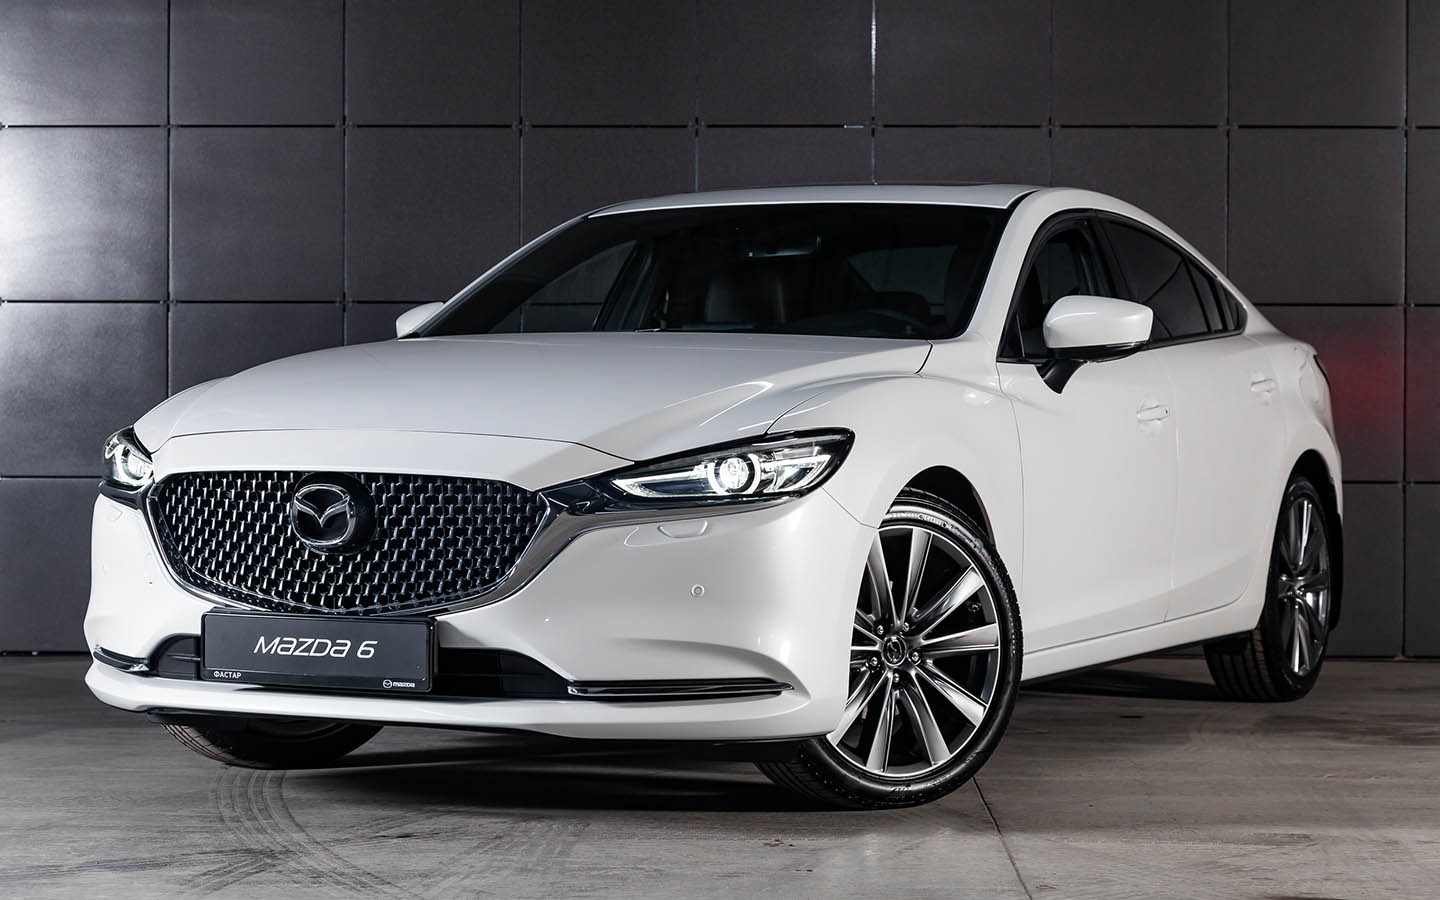 Mazda 6 ranks first, among the rest models, as the top pre-owned Mazda car in the UAE